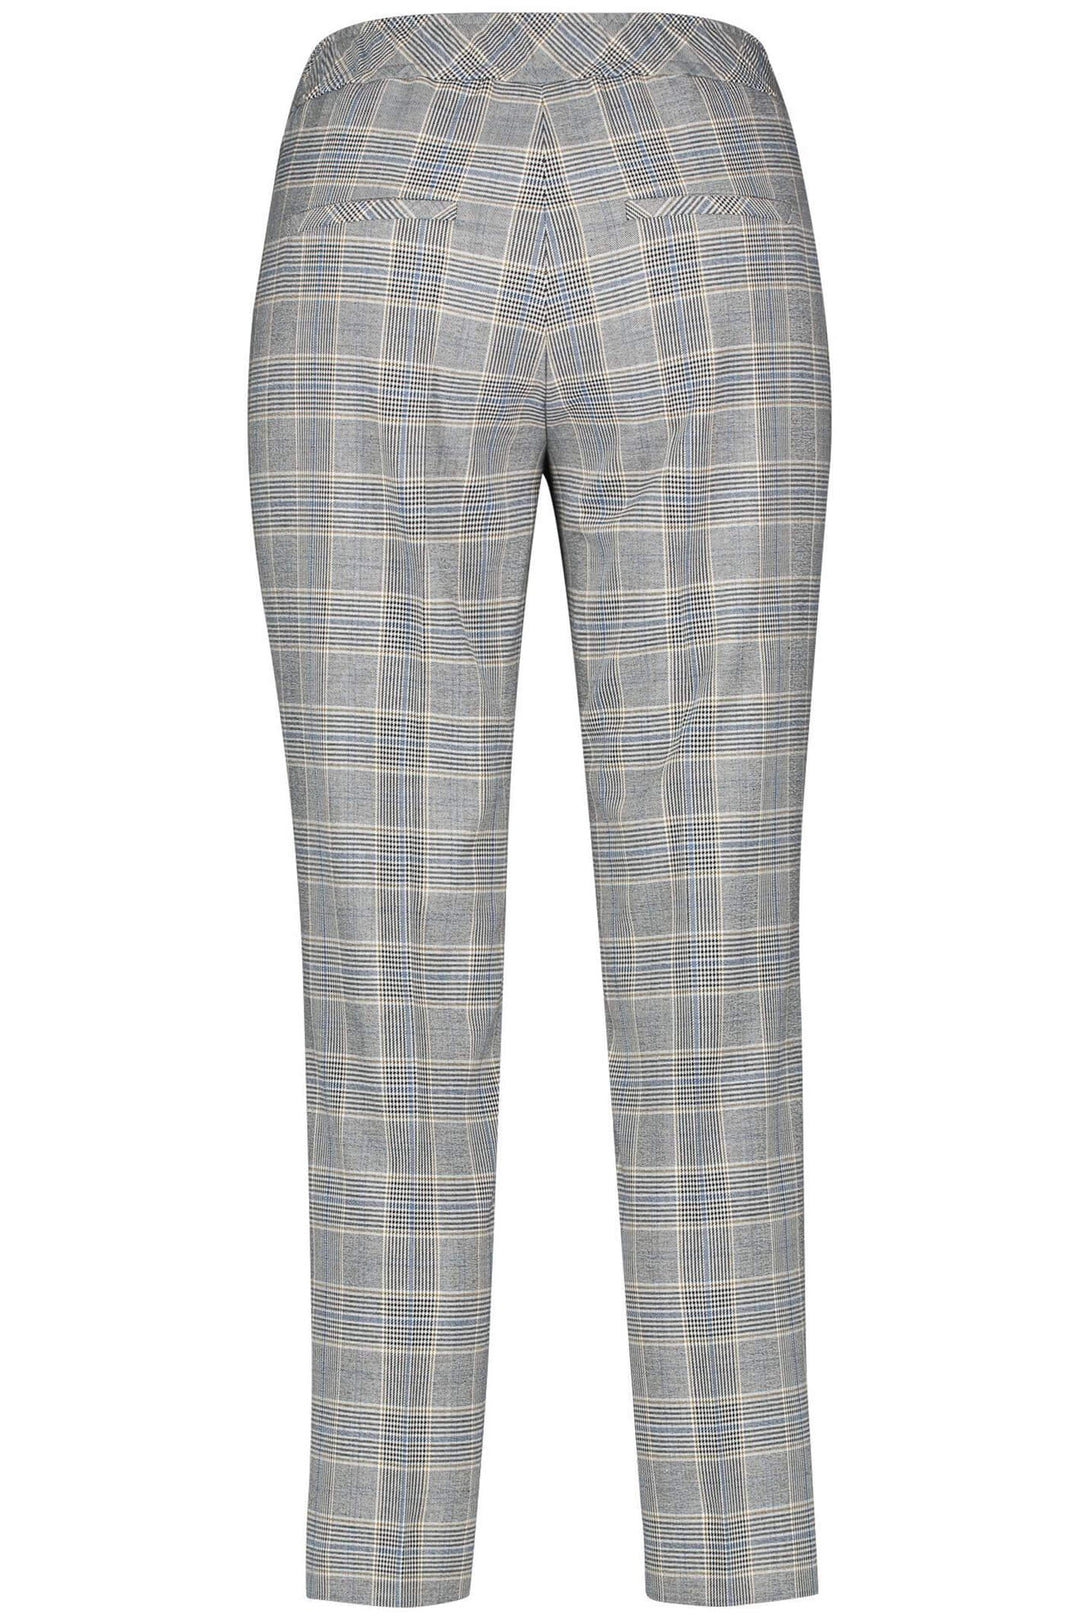 Gerry Weber 220012-31342 Grey Check Trousers - Dotique Chesterfield